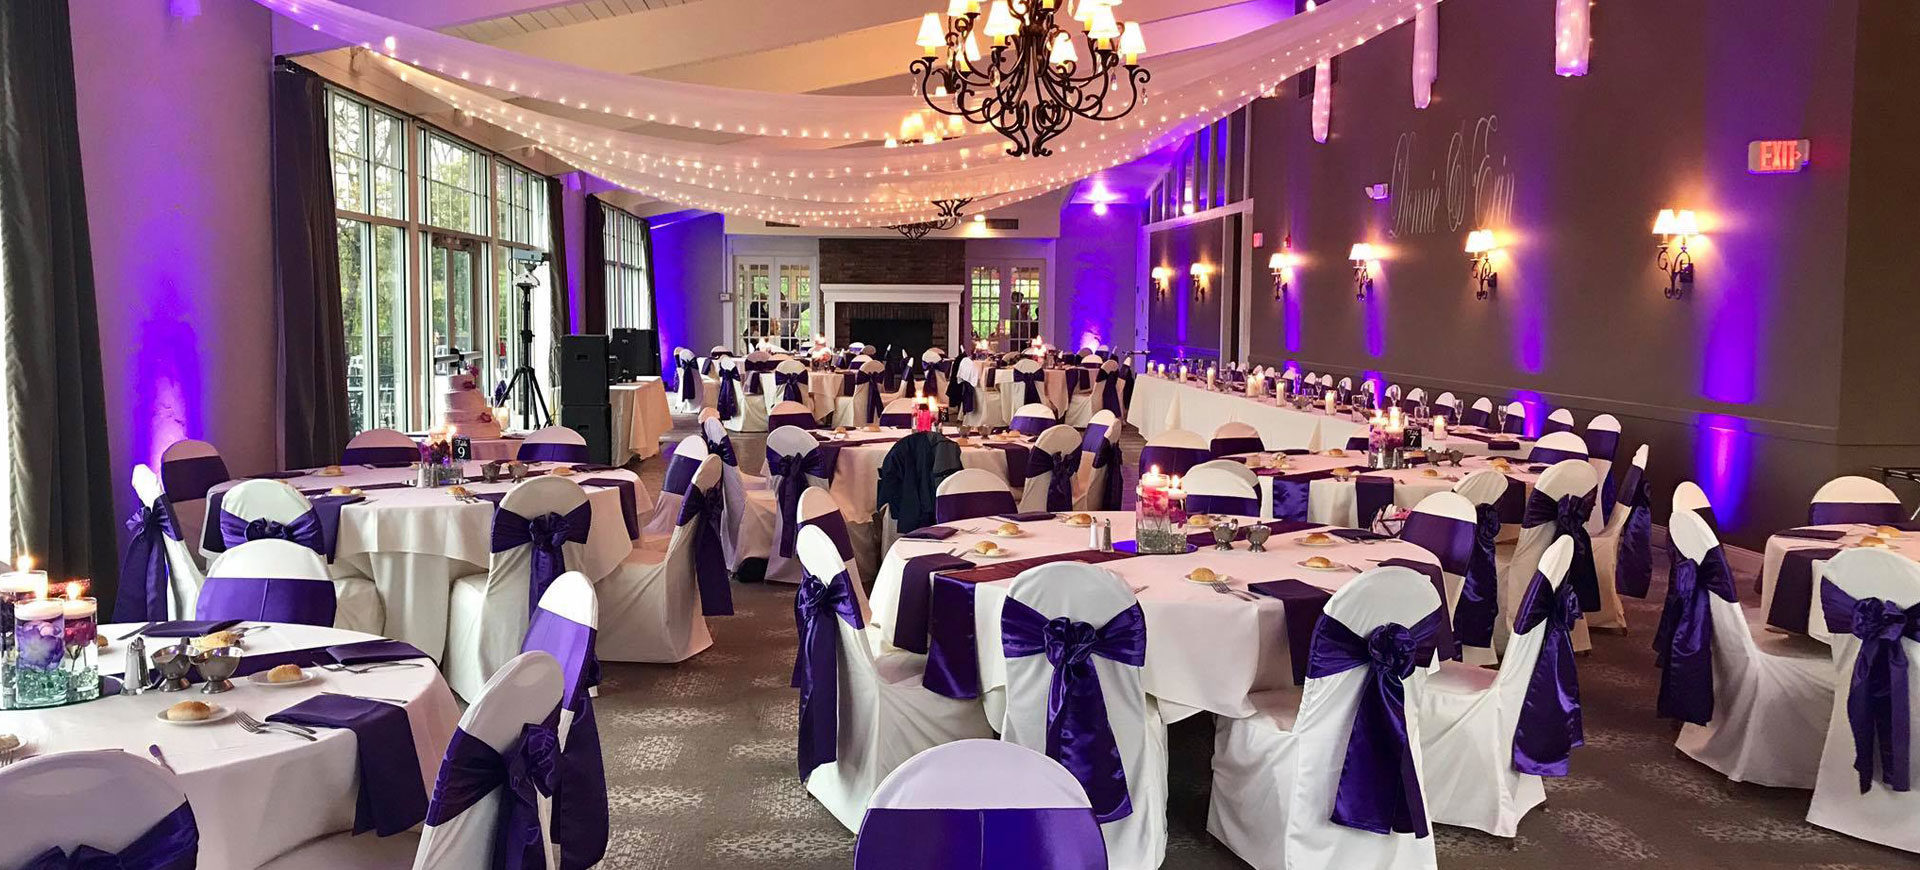 Wedding reception room set up by Normandy Catering